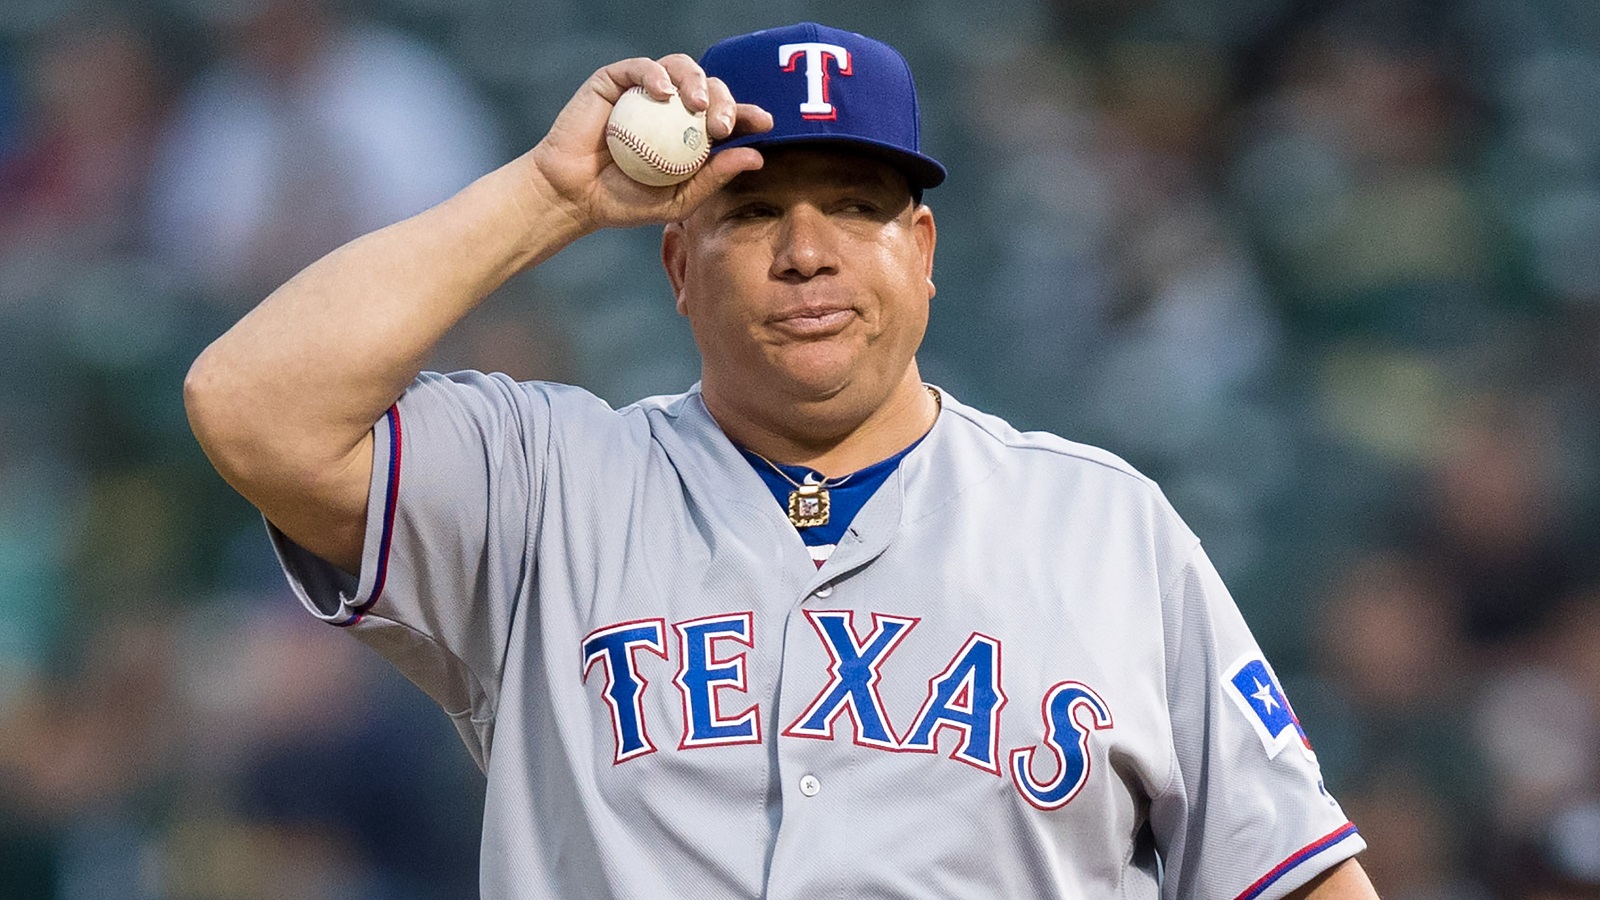 Mets reportedly hosting a Bartolo Colon retirement ceremony in August